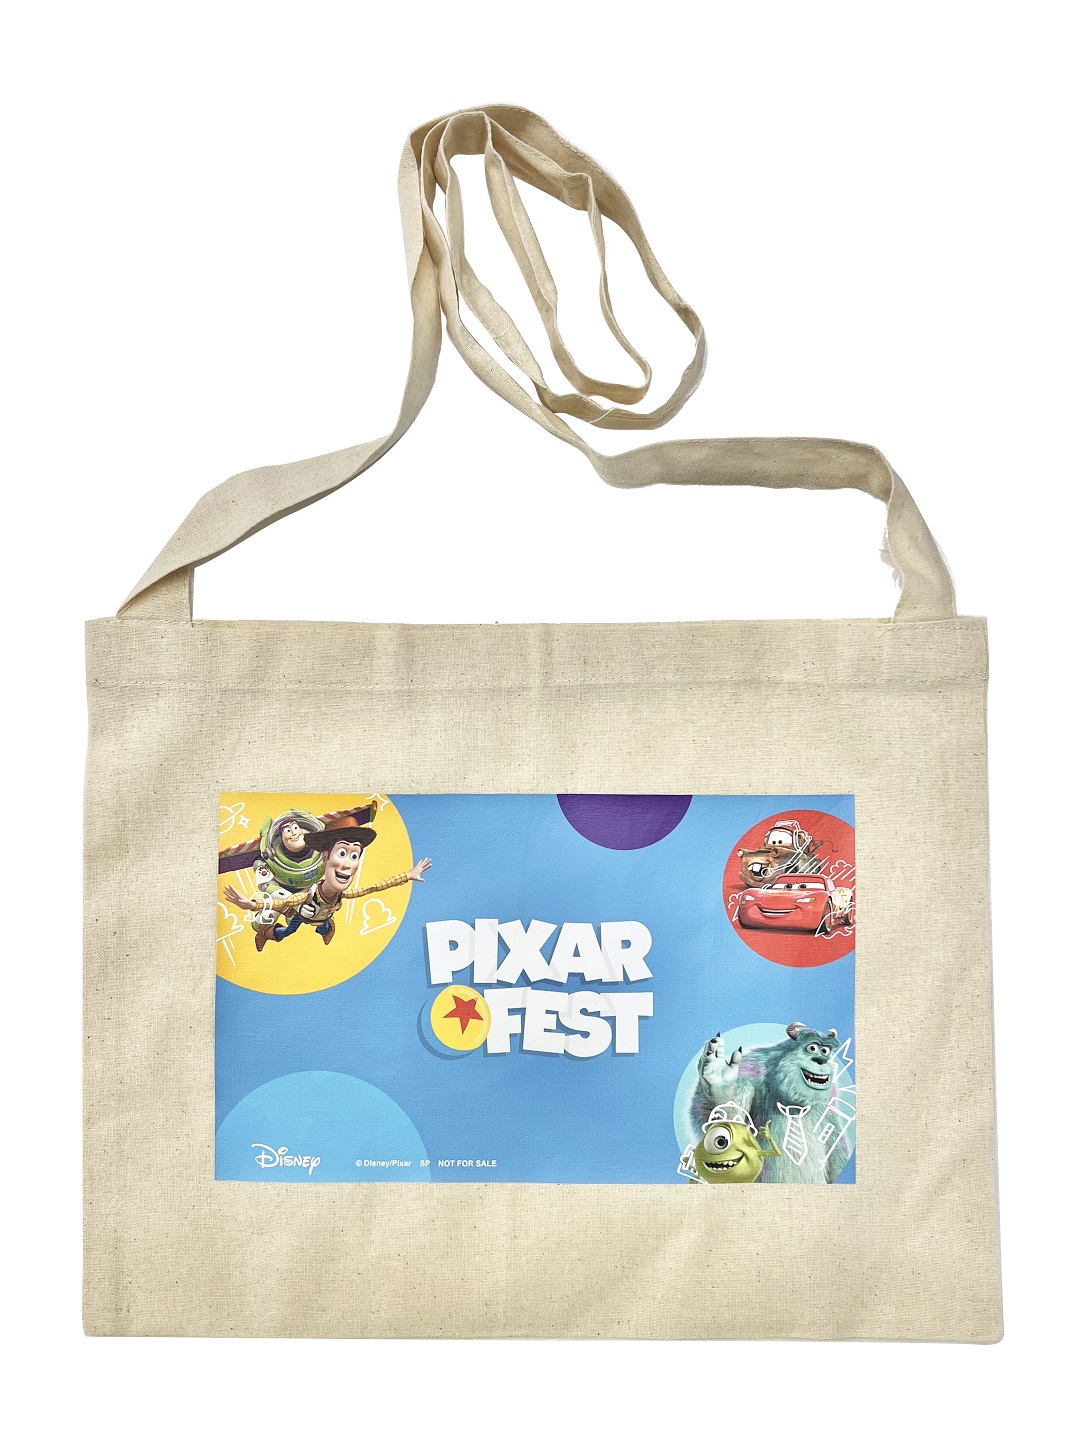 pixar-fest-pop-up-store-by-small-planet12-2